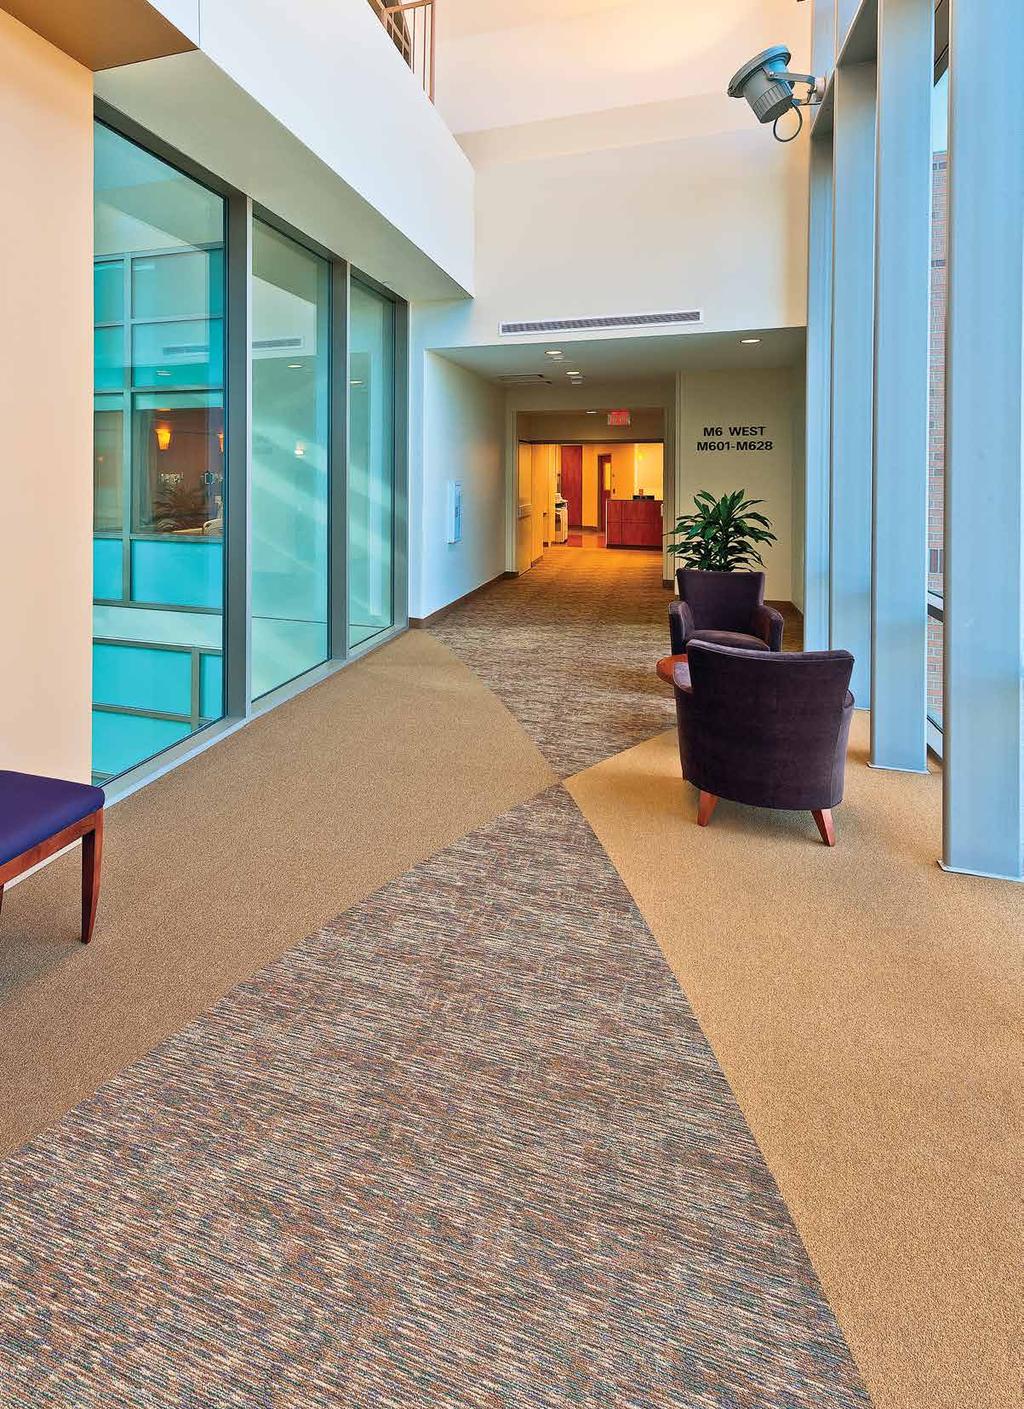 YOUR HEALTHCARE FLOORCOVERING CHECKLIST Factors to consider when choosing floorcoverings for healthcare facilities: ACOUSTICS AESTHETICS ANTIMICROBIAL PROPERTIES DURABILITY ENVIRONMENTAL ERGONOMICS